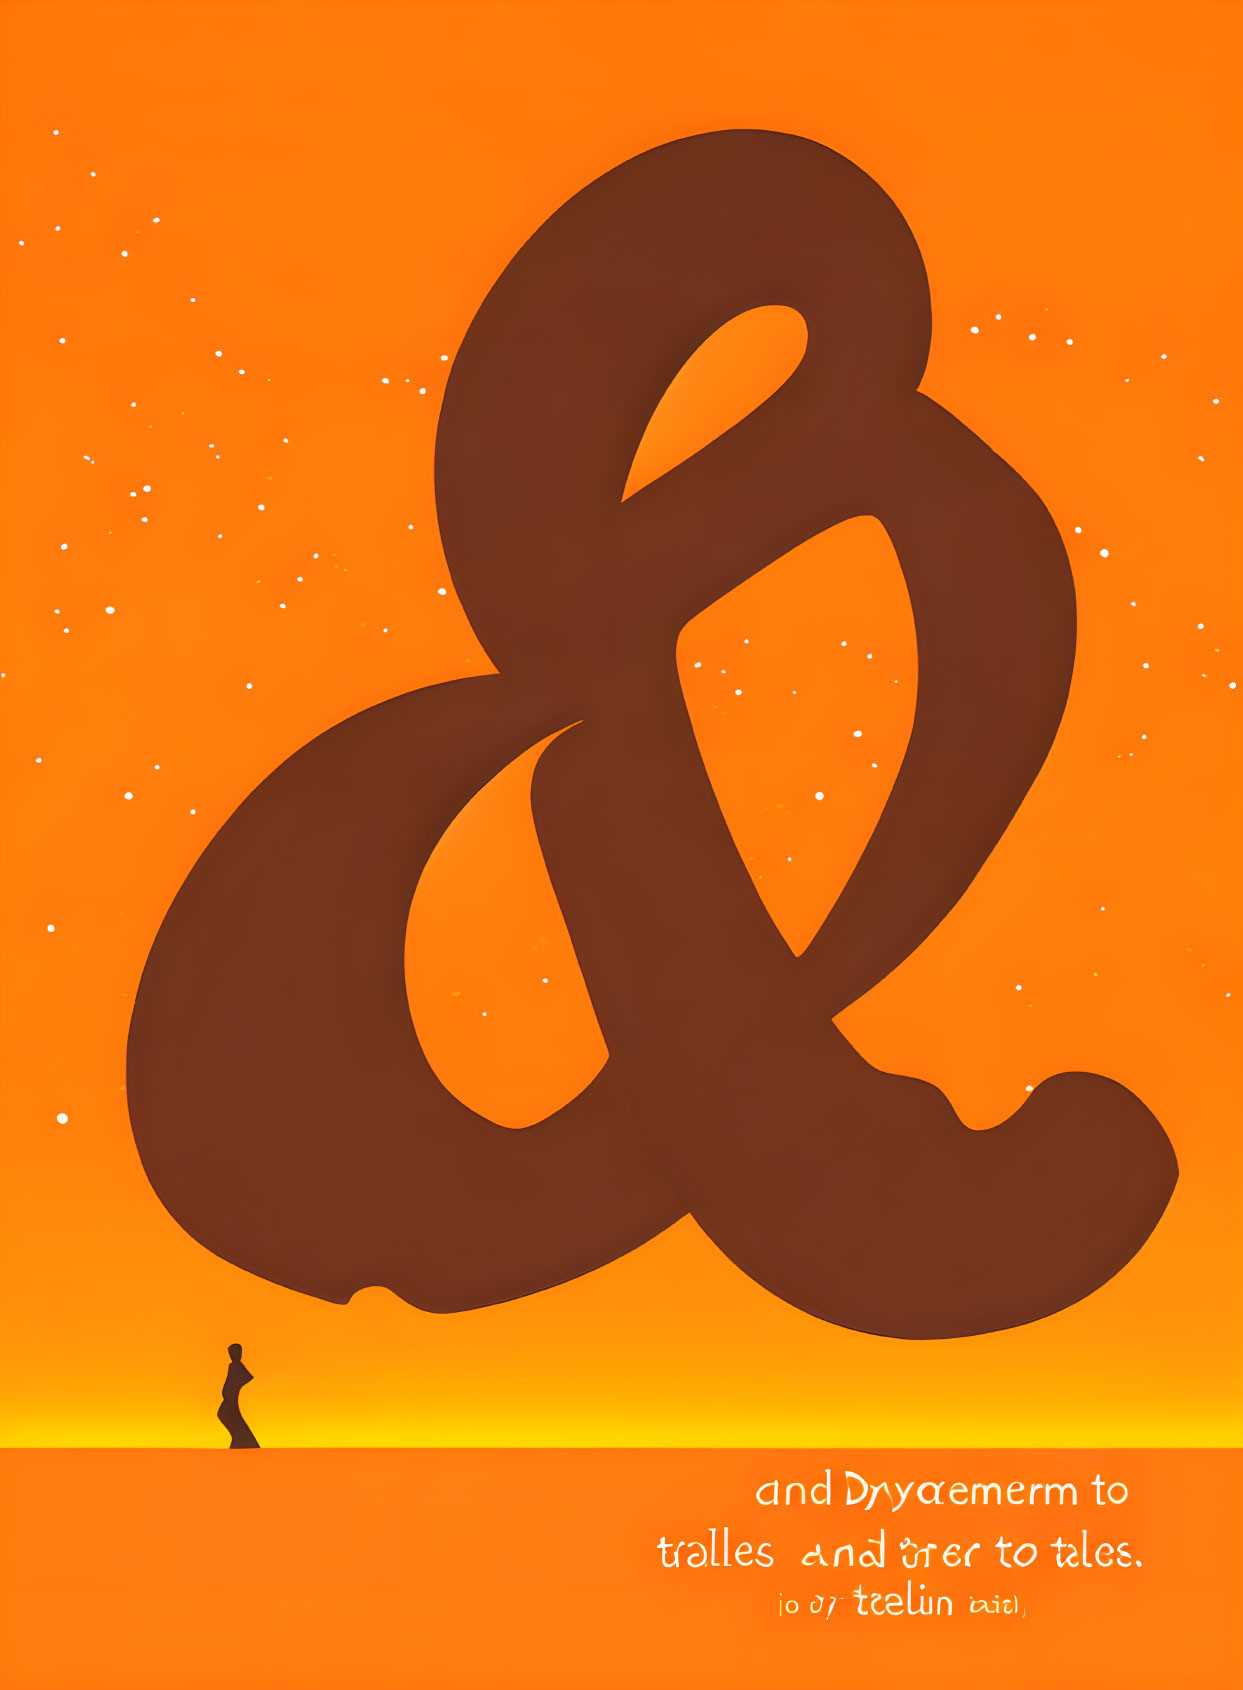 Silhouette of person under giant brown ampersand on orange background with stars.